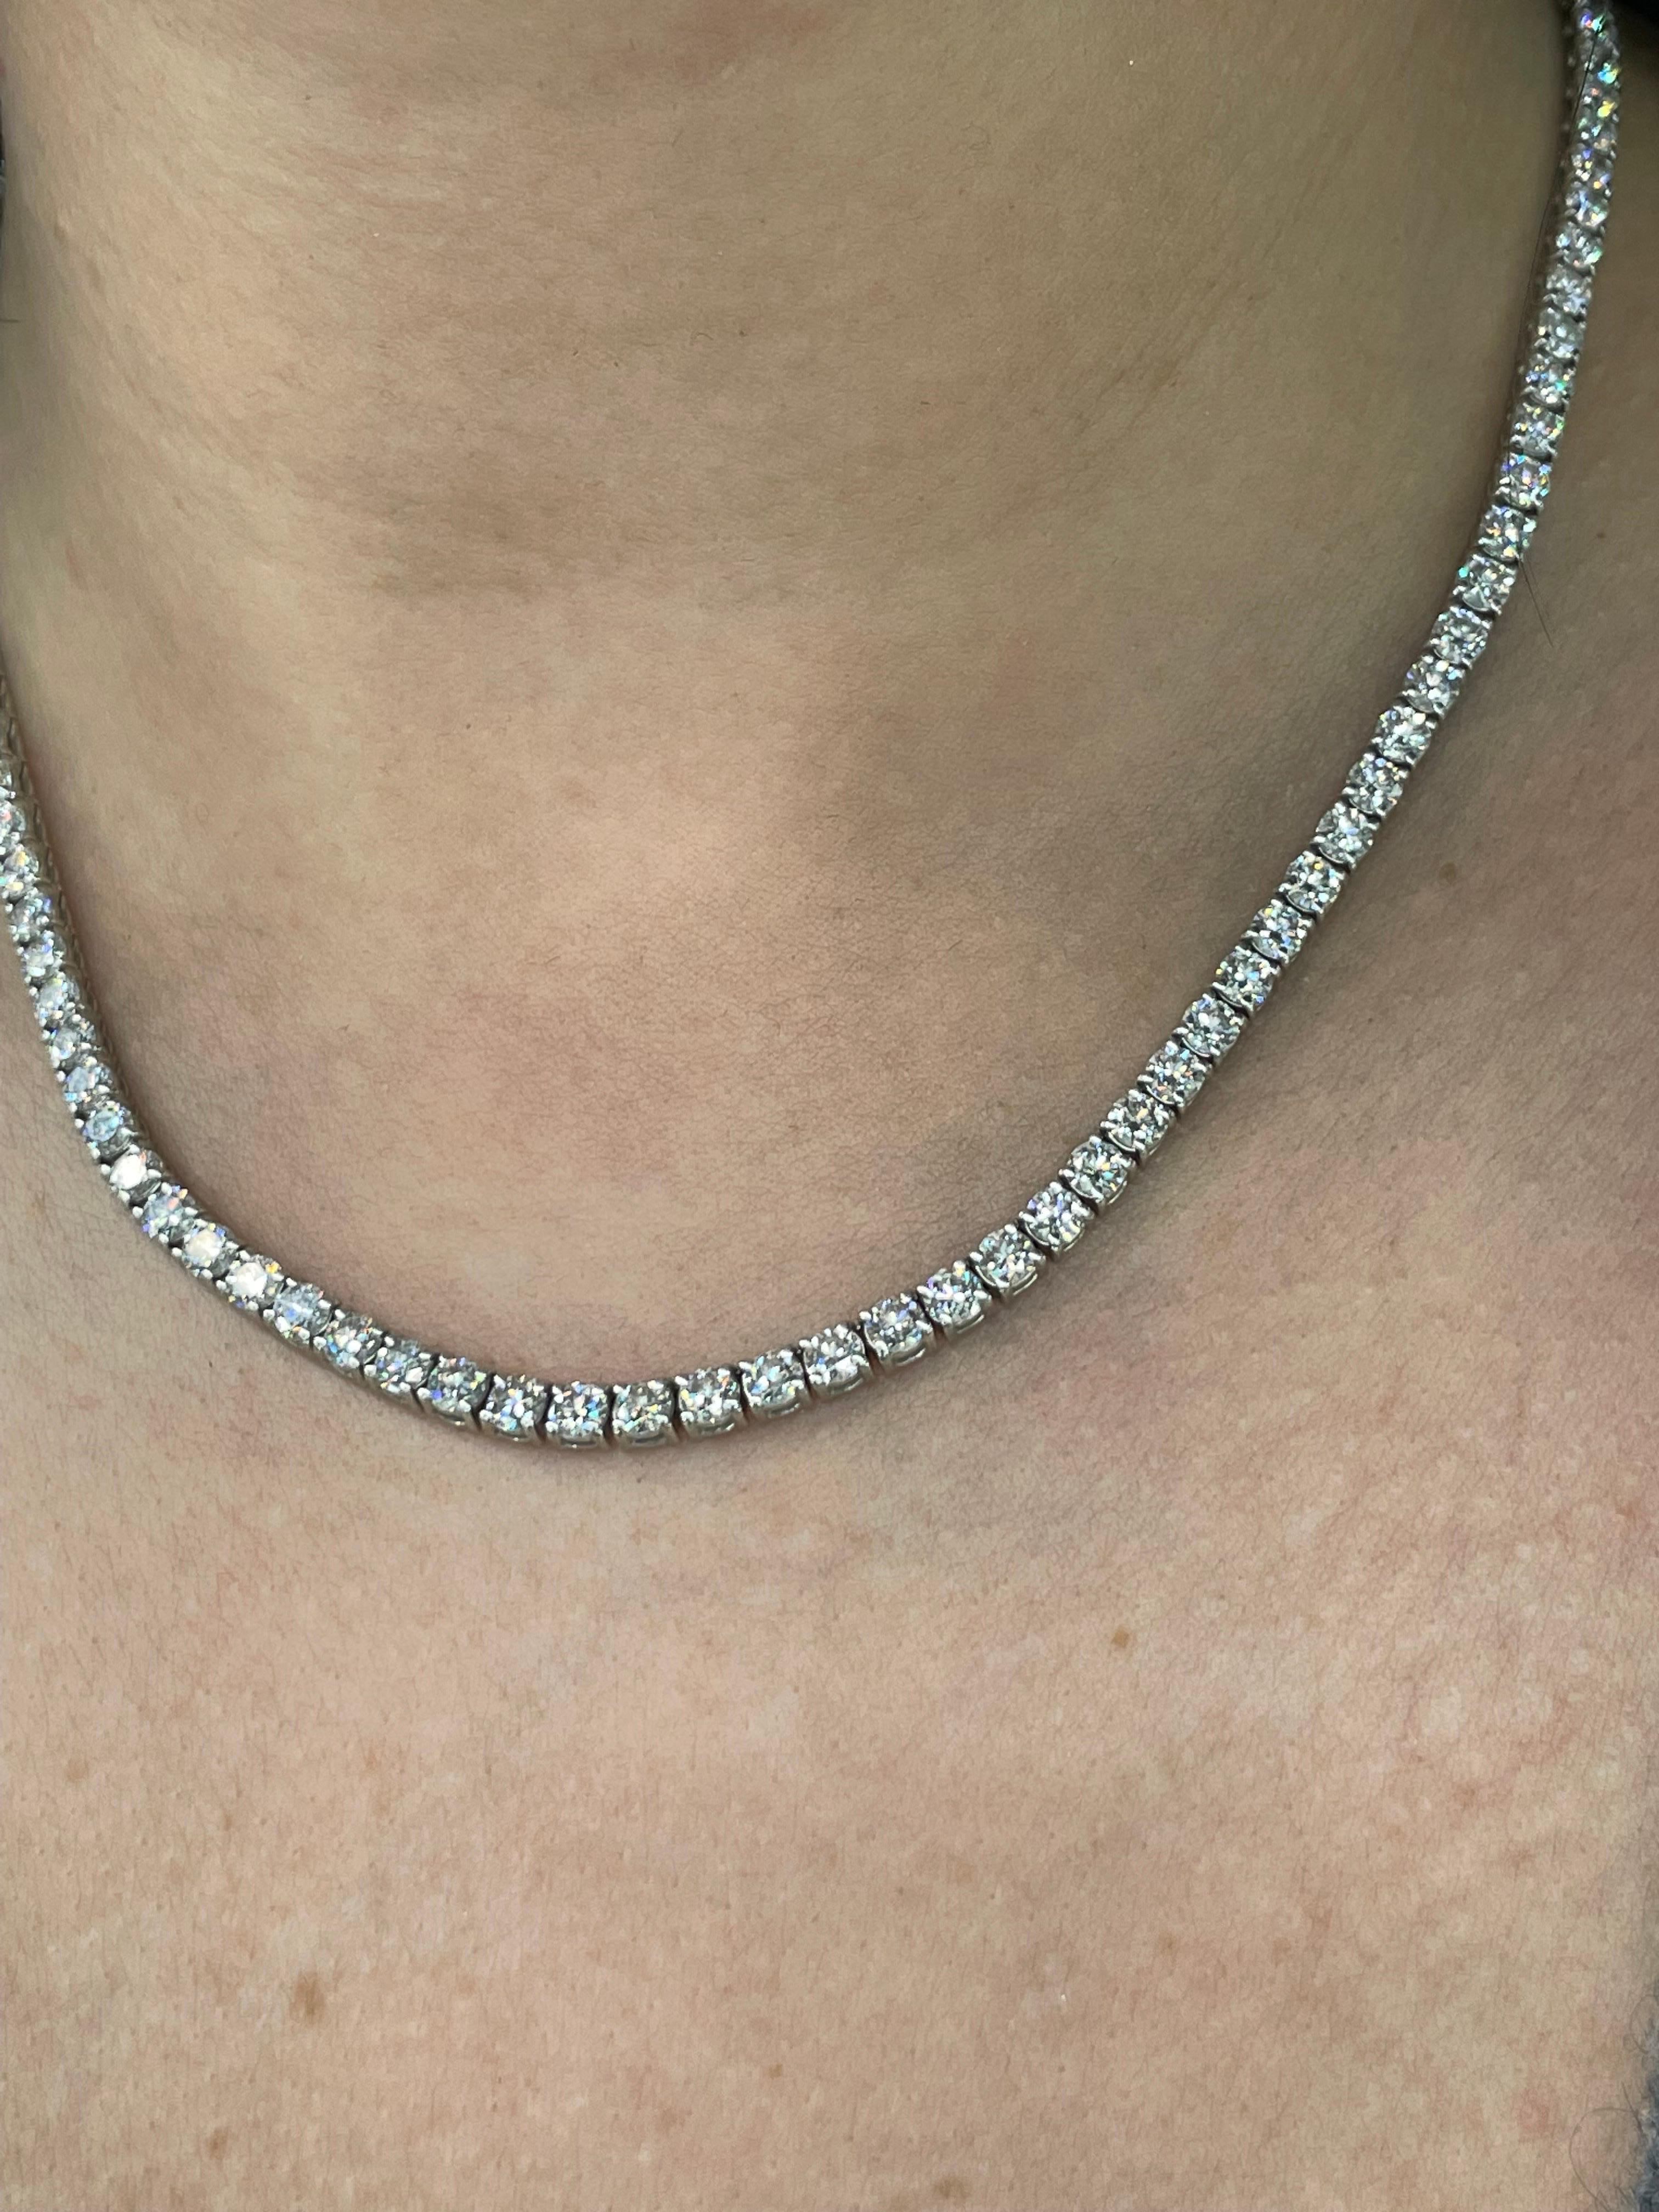 Diamonds Straight Line Necklace 17.25 Carats 14k White Gold 0.15 PTS For Sale 1